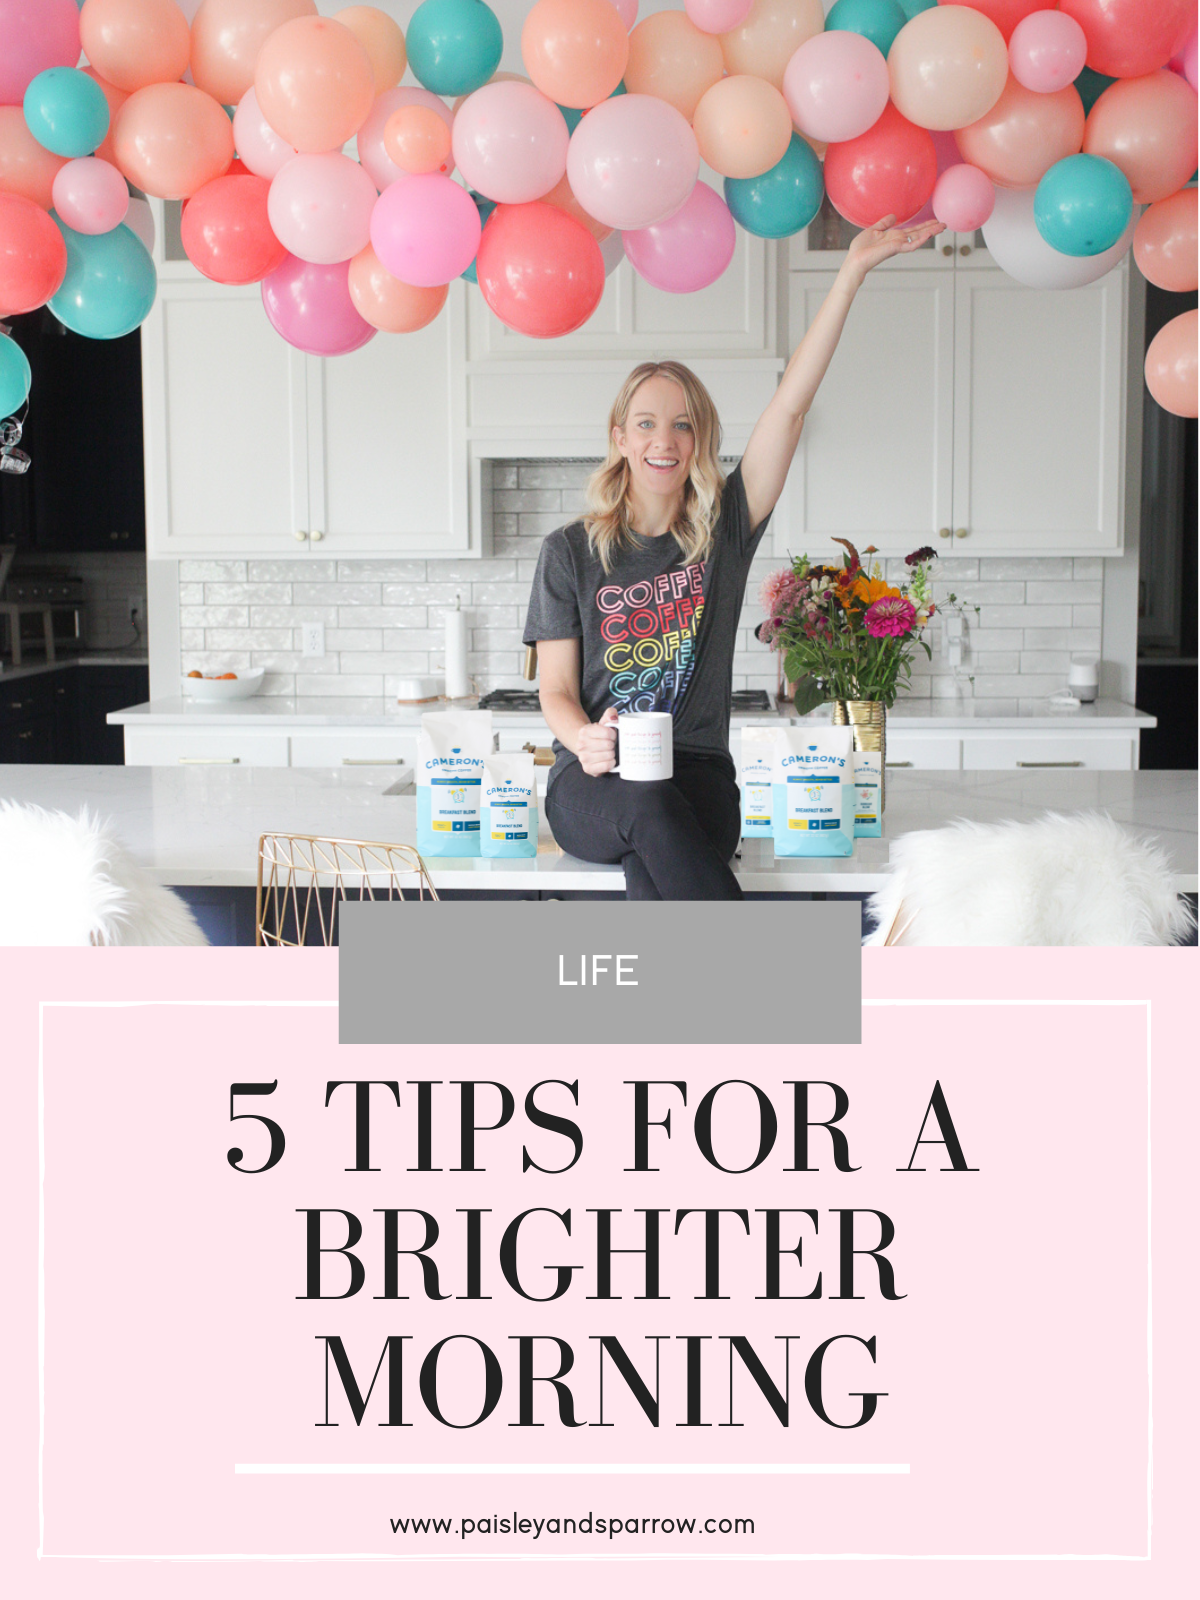 5 tips for a brighter morning